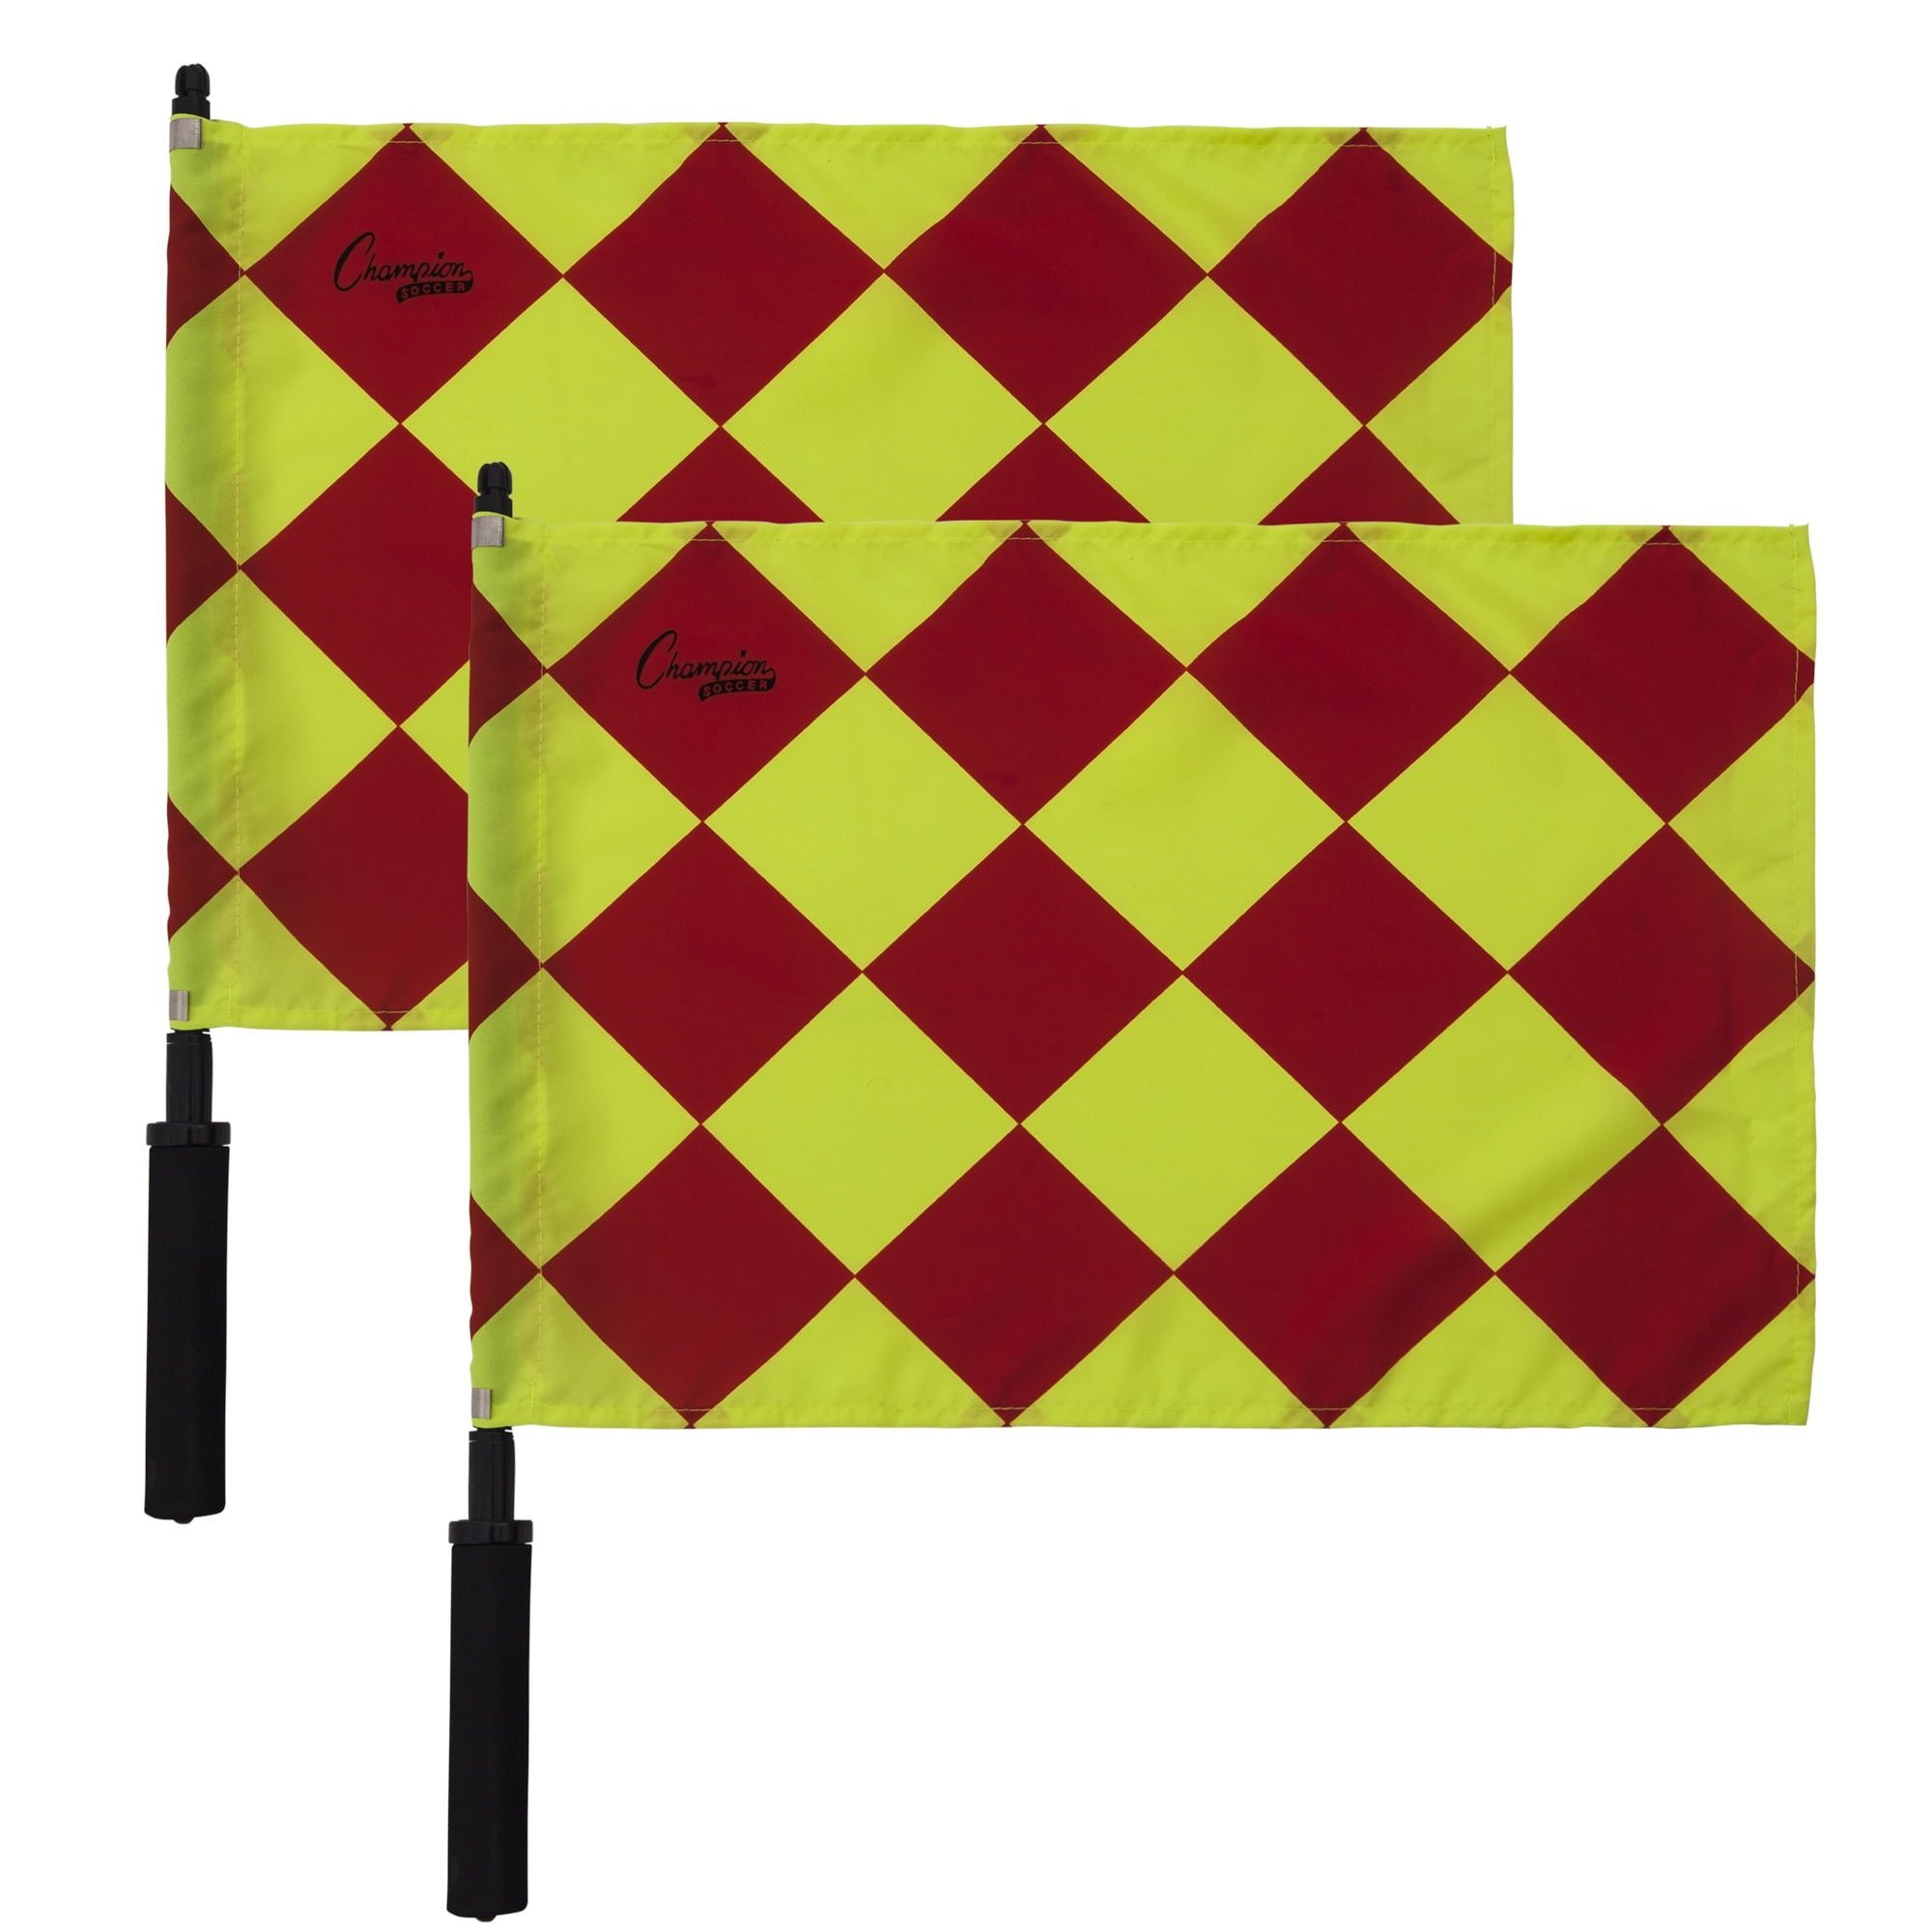 Picture of Champion Sports LF3 Official Diamond Flag, Red & Yellow